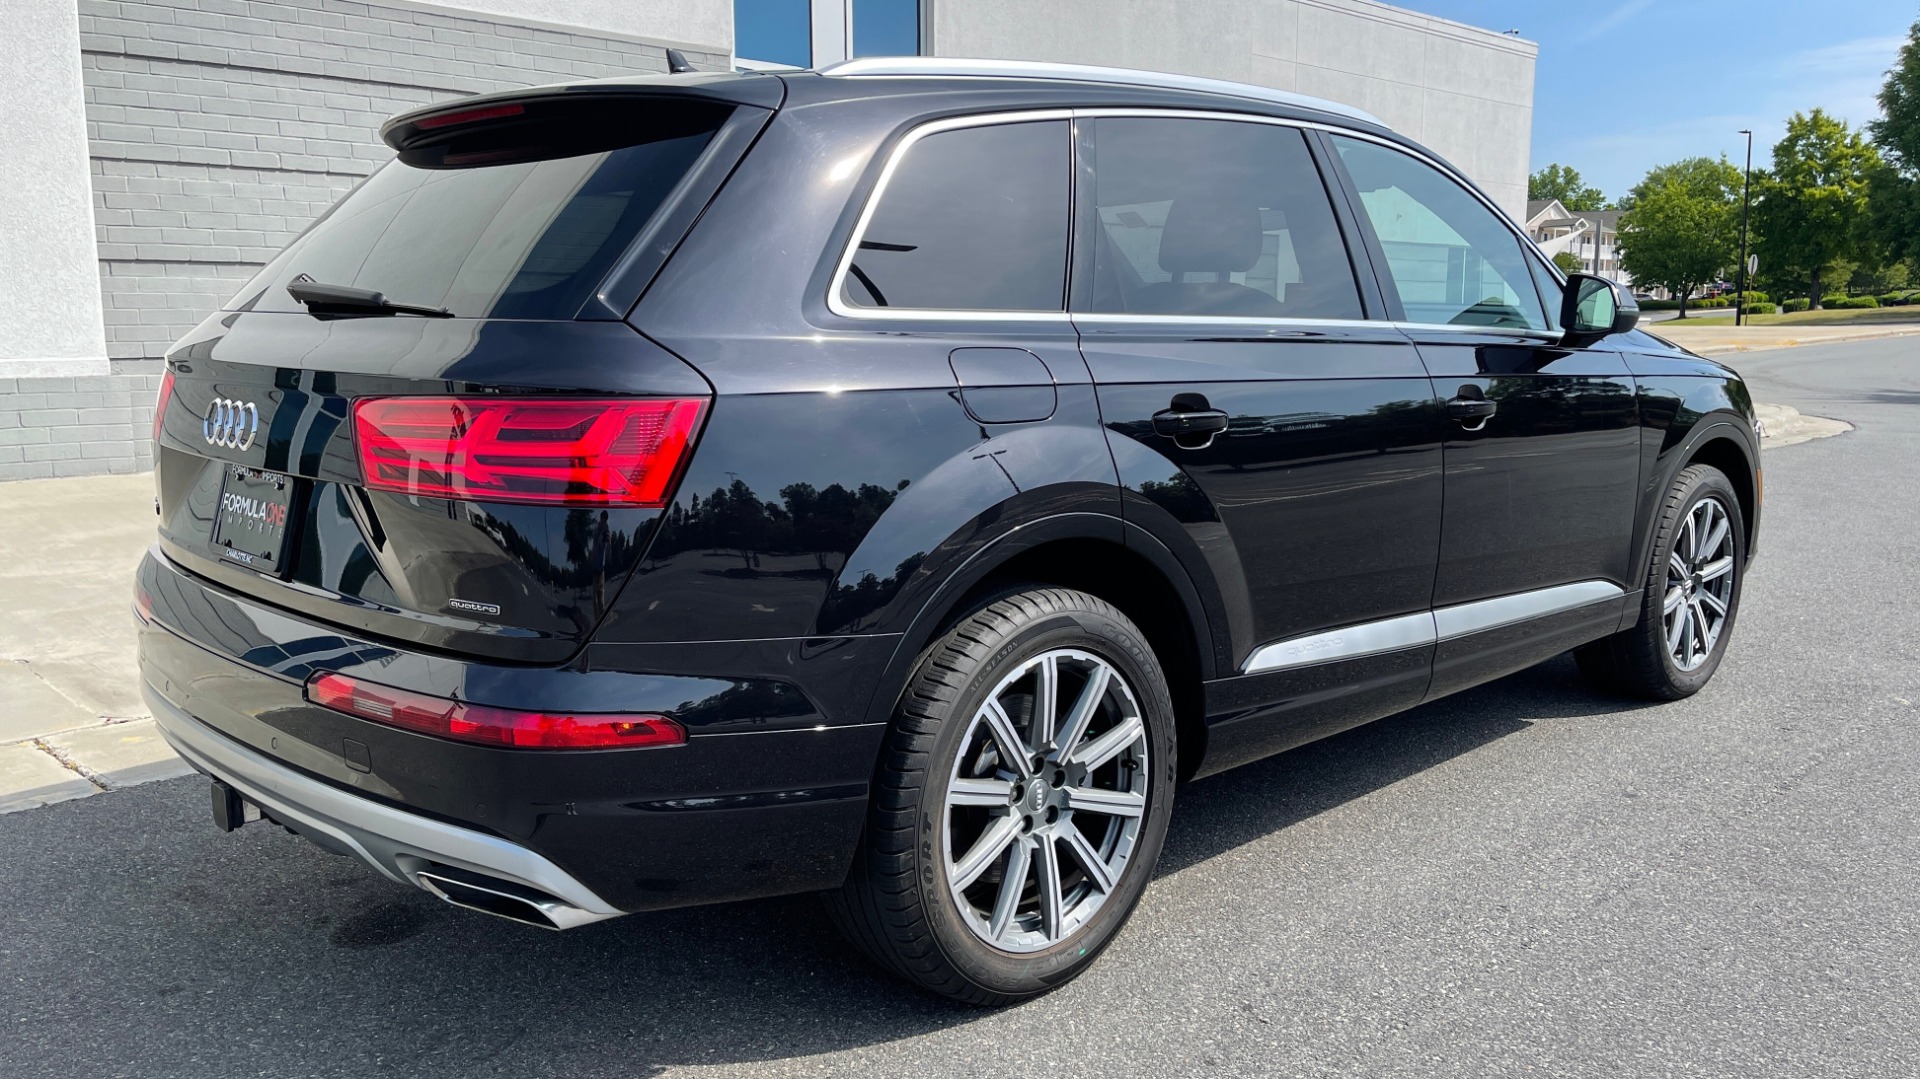 Used 2018 Audi Q7 PREMIUM PLUS / NAV / PANO-ROOF / BOSE / 3-ROW / REARVIEW for sale Sold at Formula Imports in Charlotte NC 28227 2